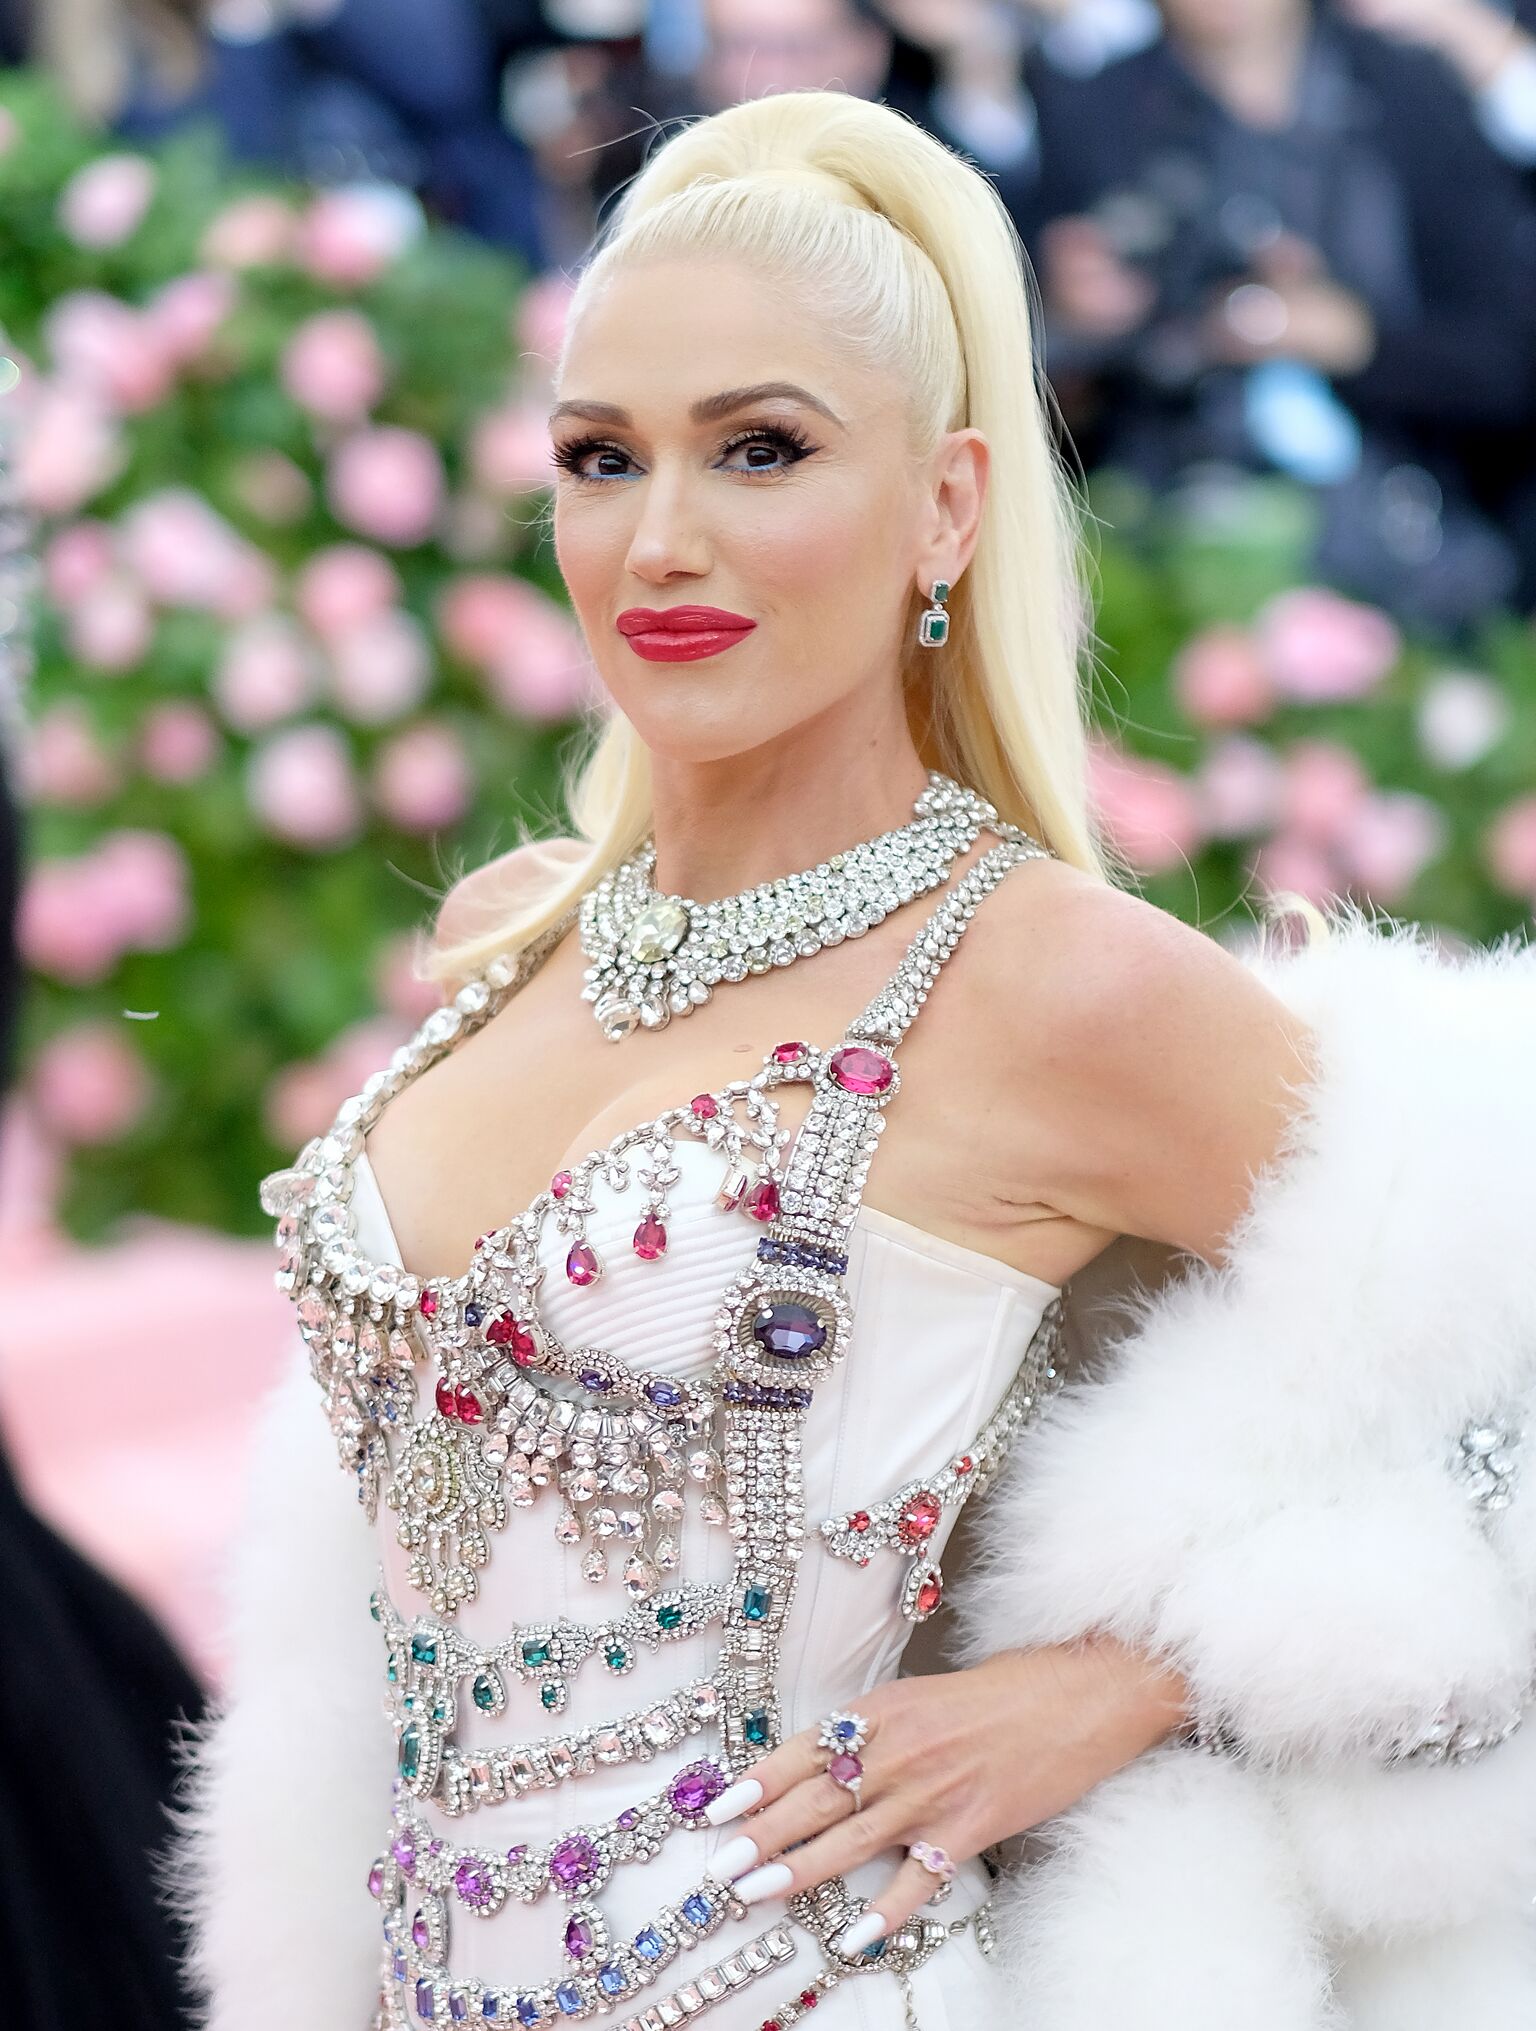 Gwen Stefani attends The 2019 Met Gala Celebrating Camp: Notes on Fashion at Metropolitan Museum of Art May 15, 2019 | Photo: Getty Images